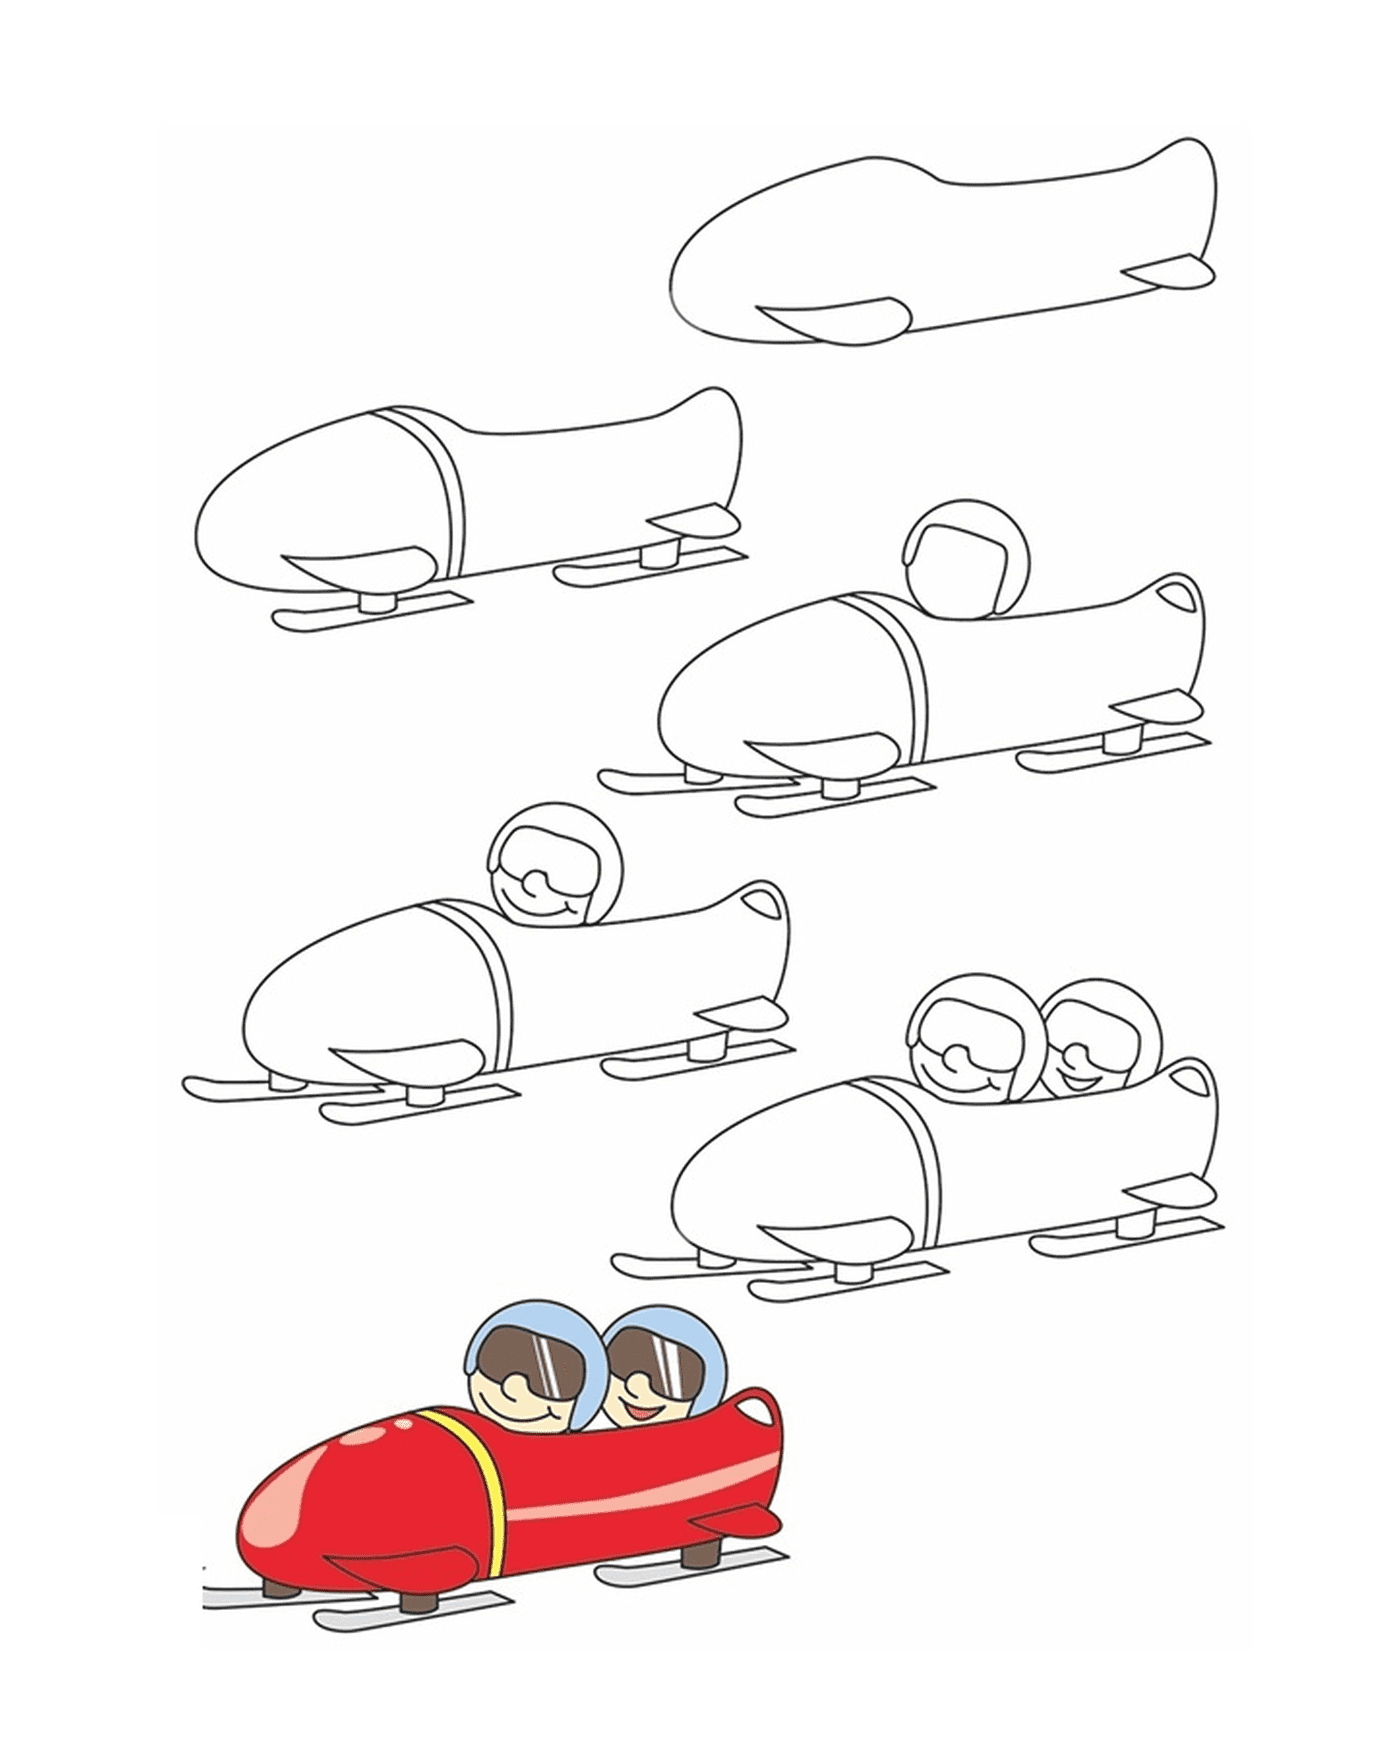  How to draw a bobsleigh 